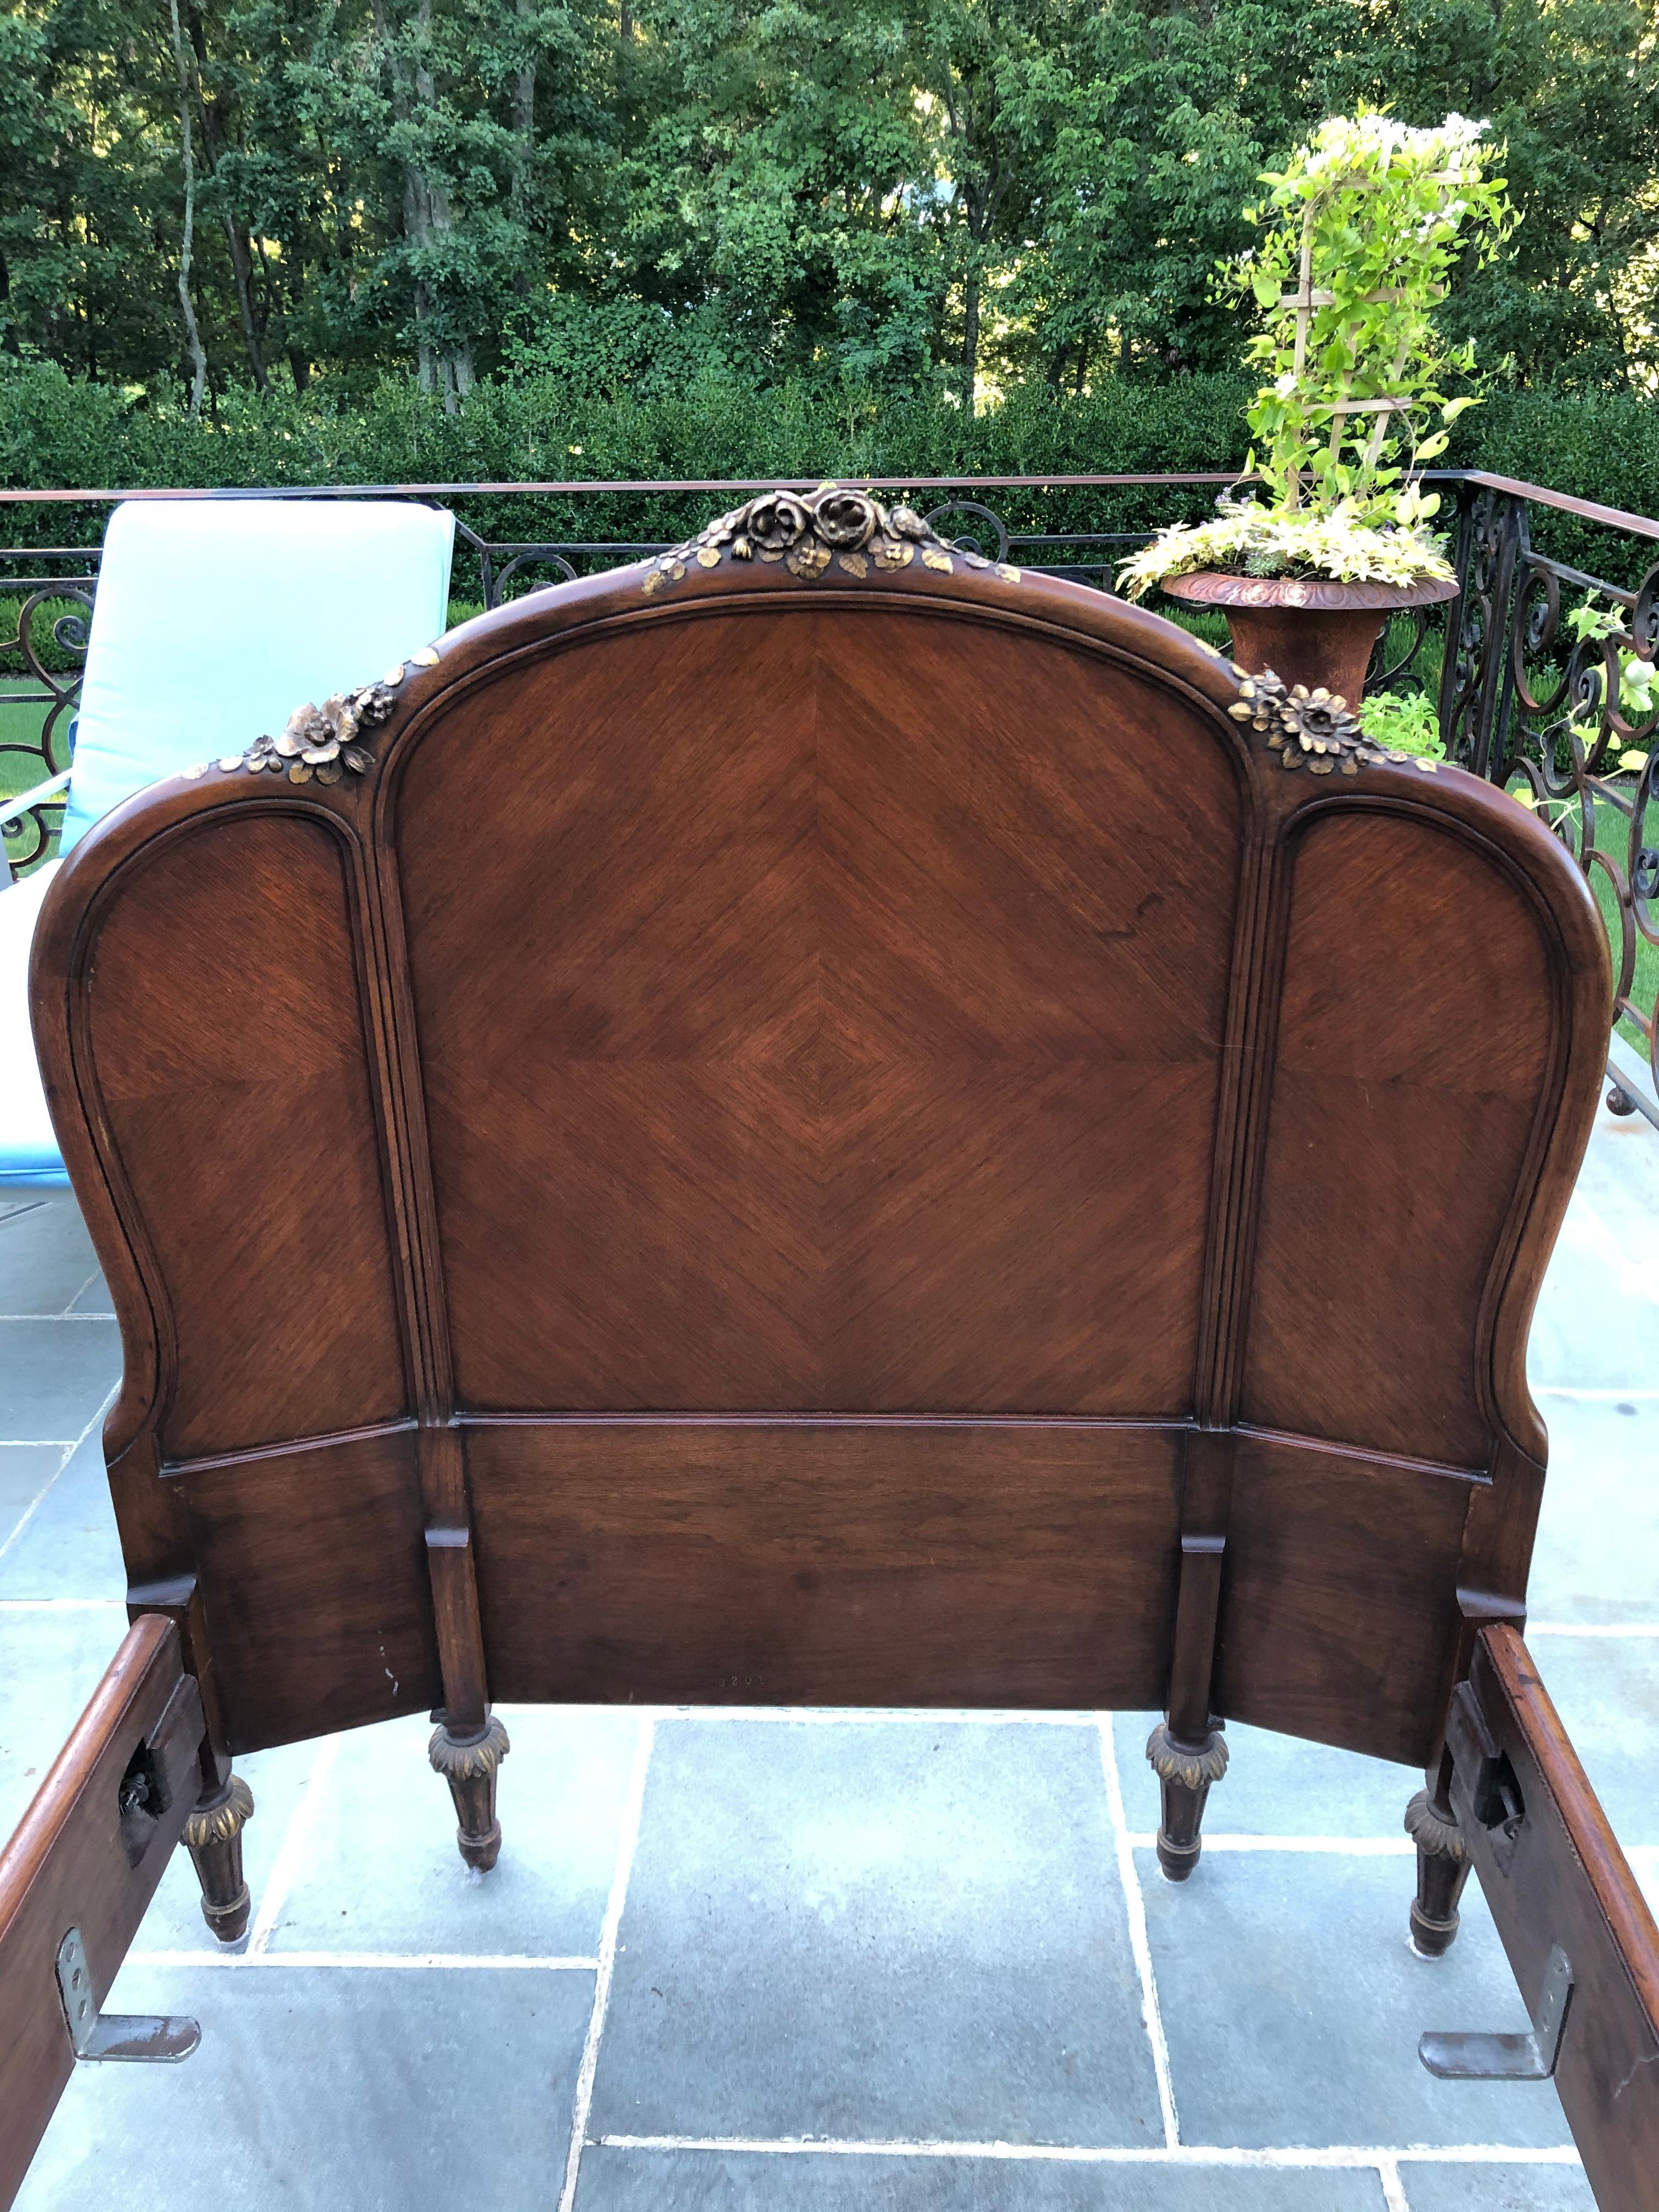 This elegant twin-size bed features beautifully carved gold-leaf roses on the crest and angled headboard. The foot-board has a inlay at the center and two carved posts with gold leaf. Two side-rails complete the bed frame. 1100A standard twin size